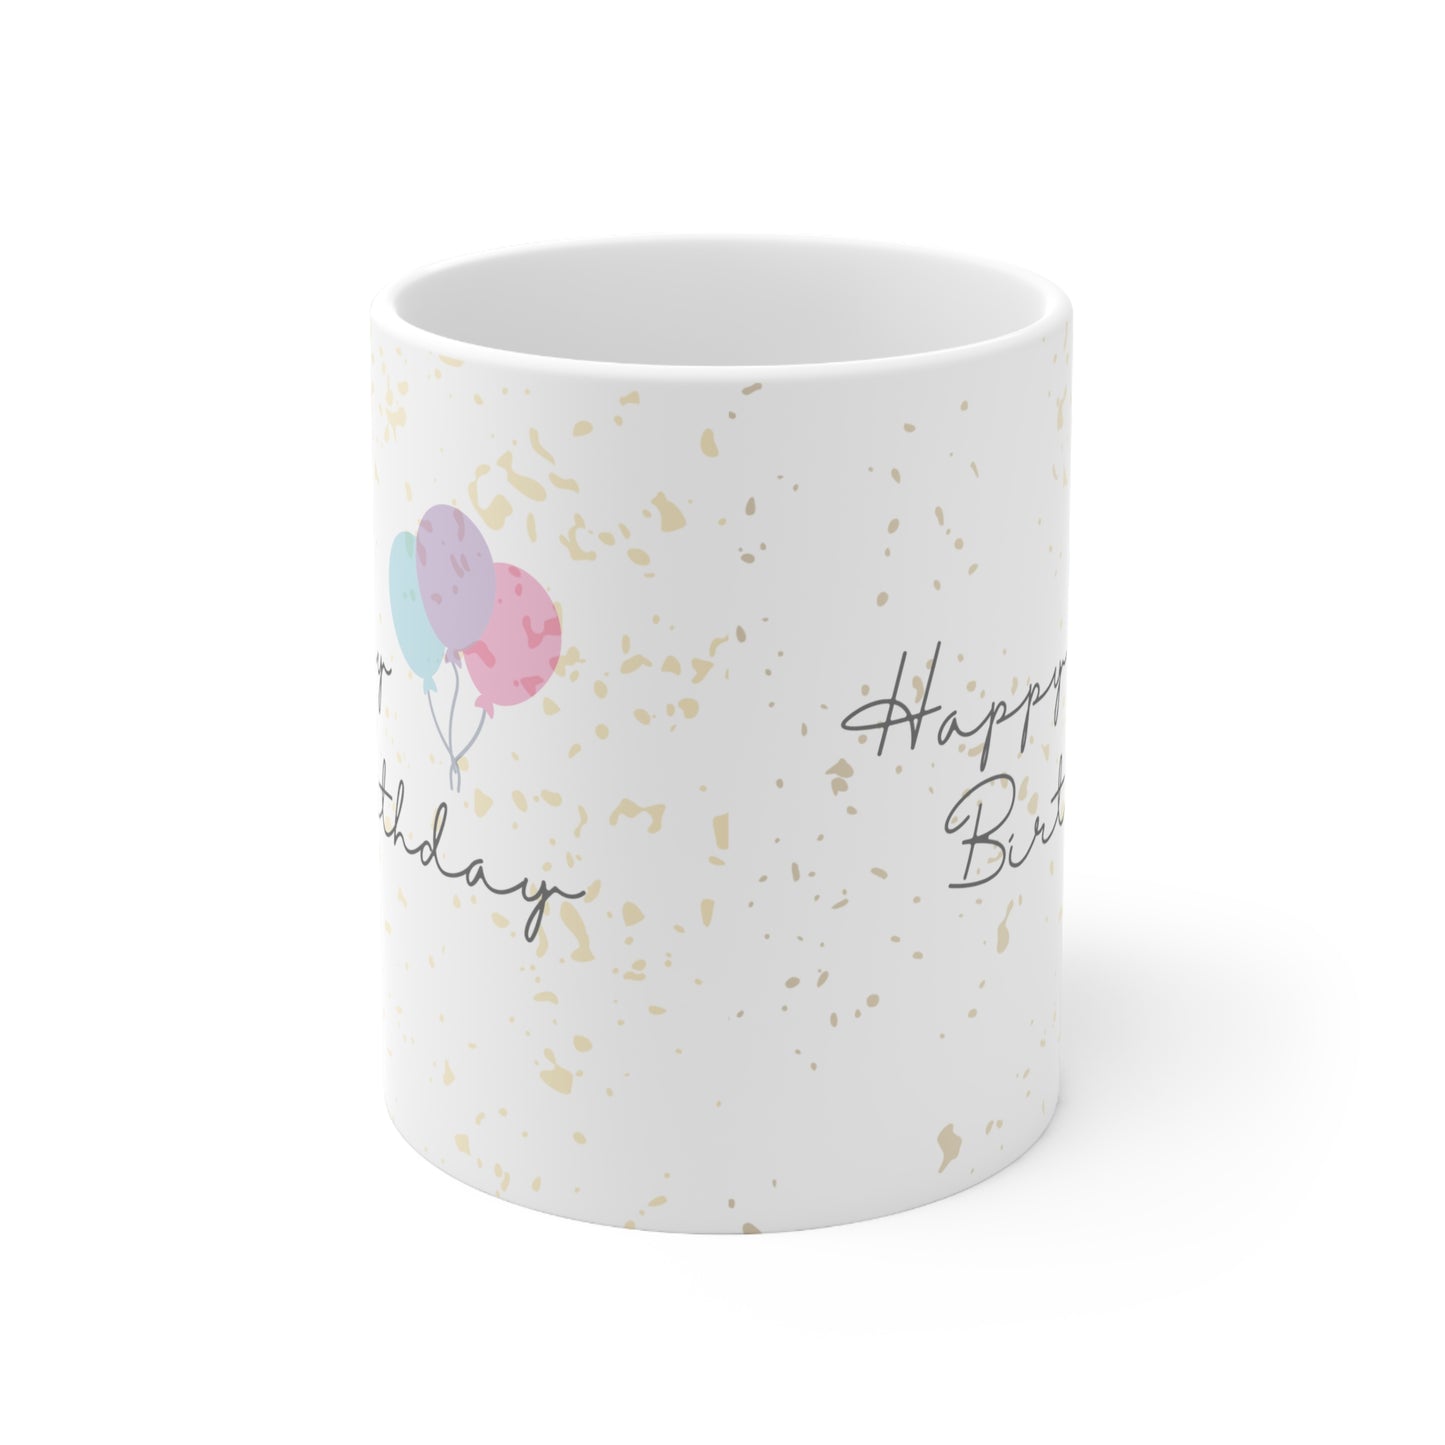 Happy Birthday with Balloons Coffee Mugs, White and Pink